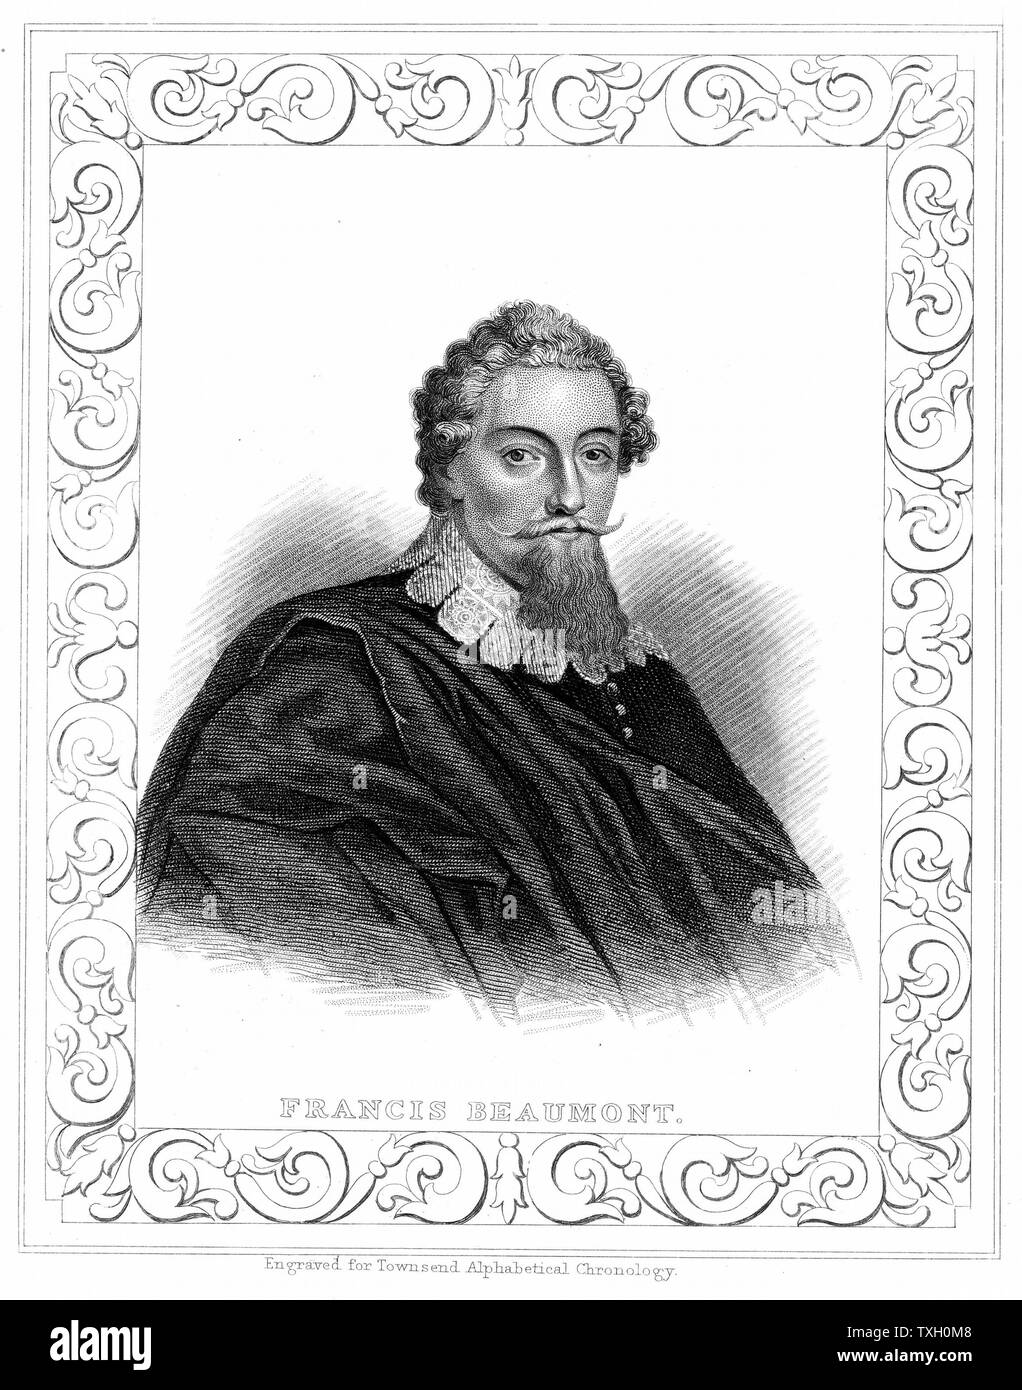 Francis Beaumont (1584-1616) English playwright and poet. Collaborated with playwright John Fletcher. Engraving Stock Photo